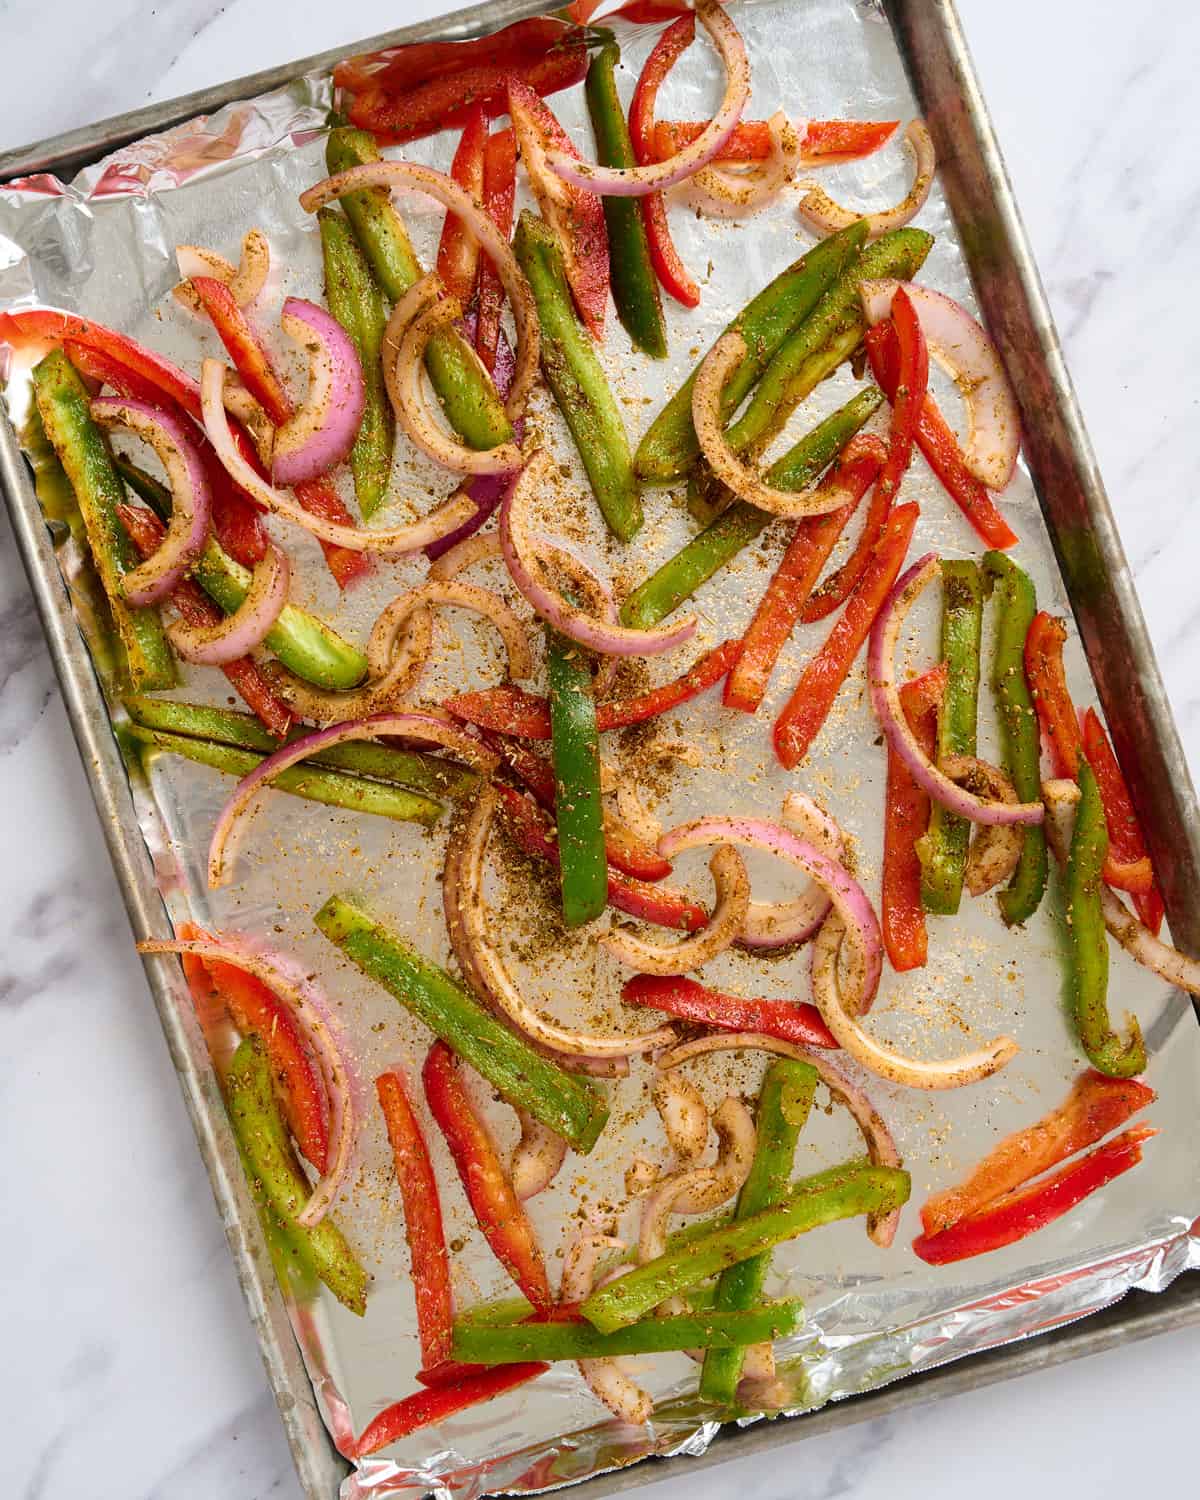 Halloumi fajitas raw bell peppers and onion on sheet tray with seasoning mix.